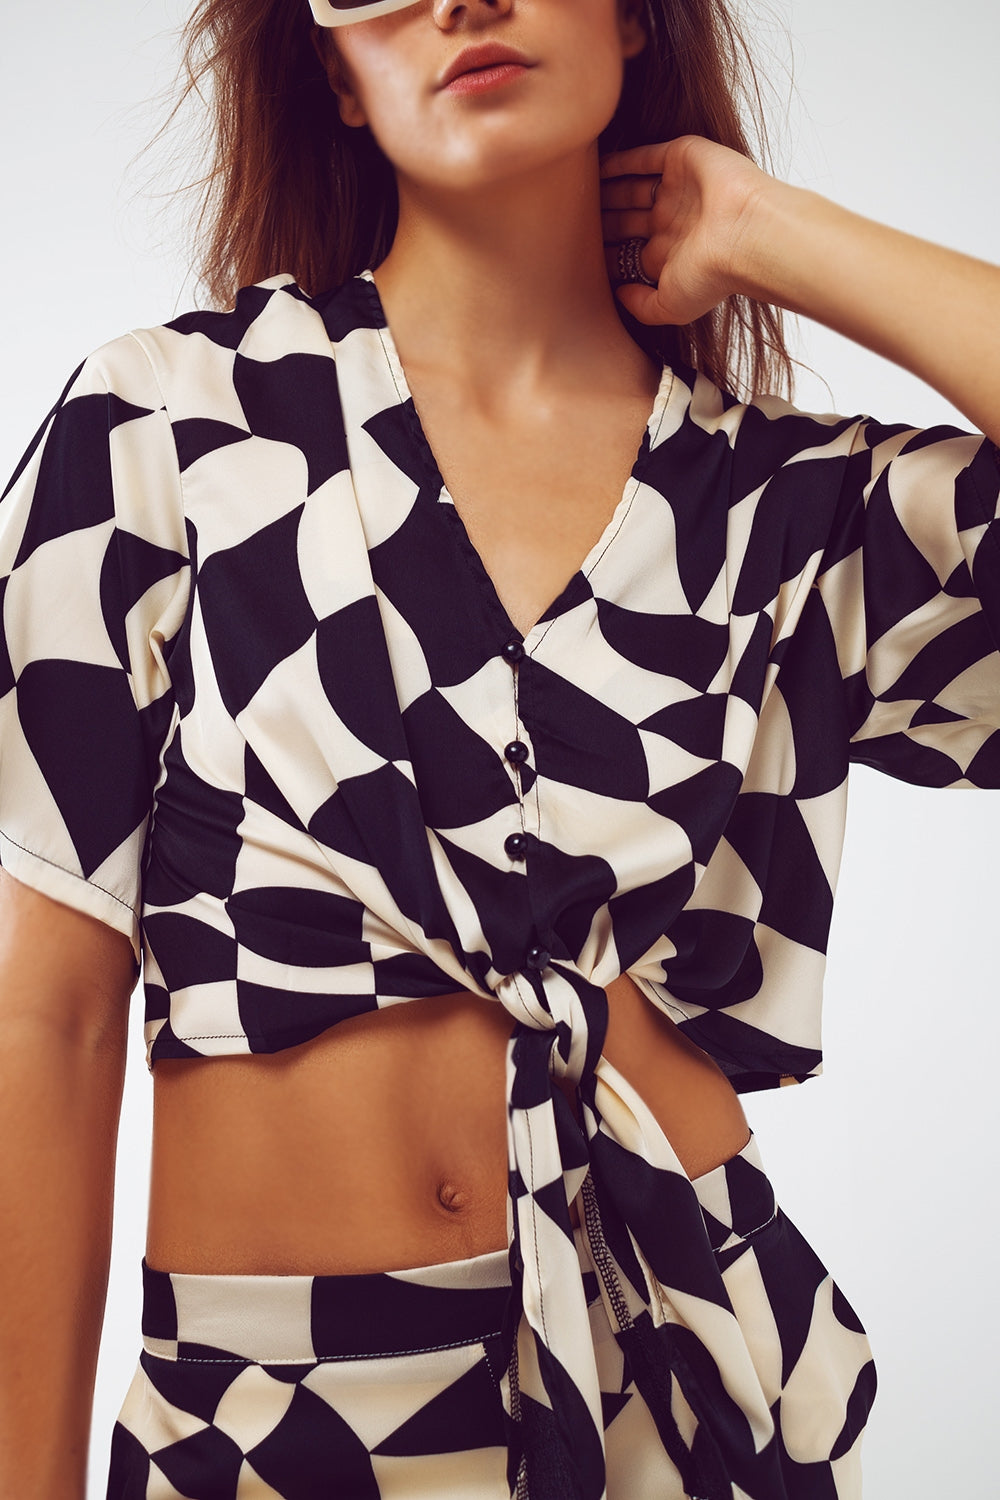 Cropped Shirt With Knot in Bauhaus Abstract Black and White Print - Szua Store